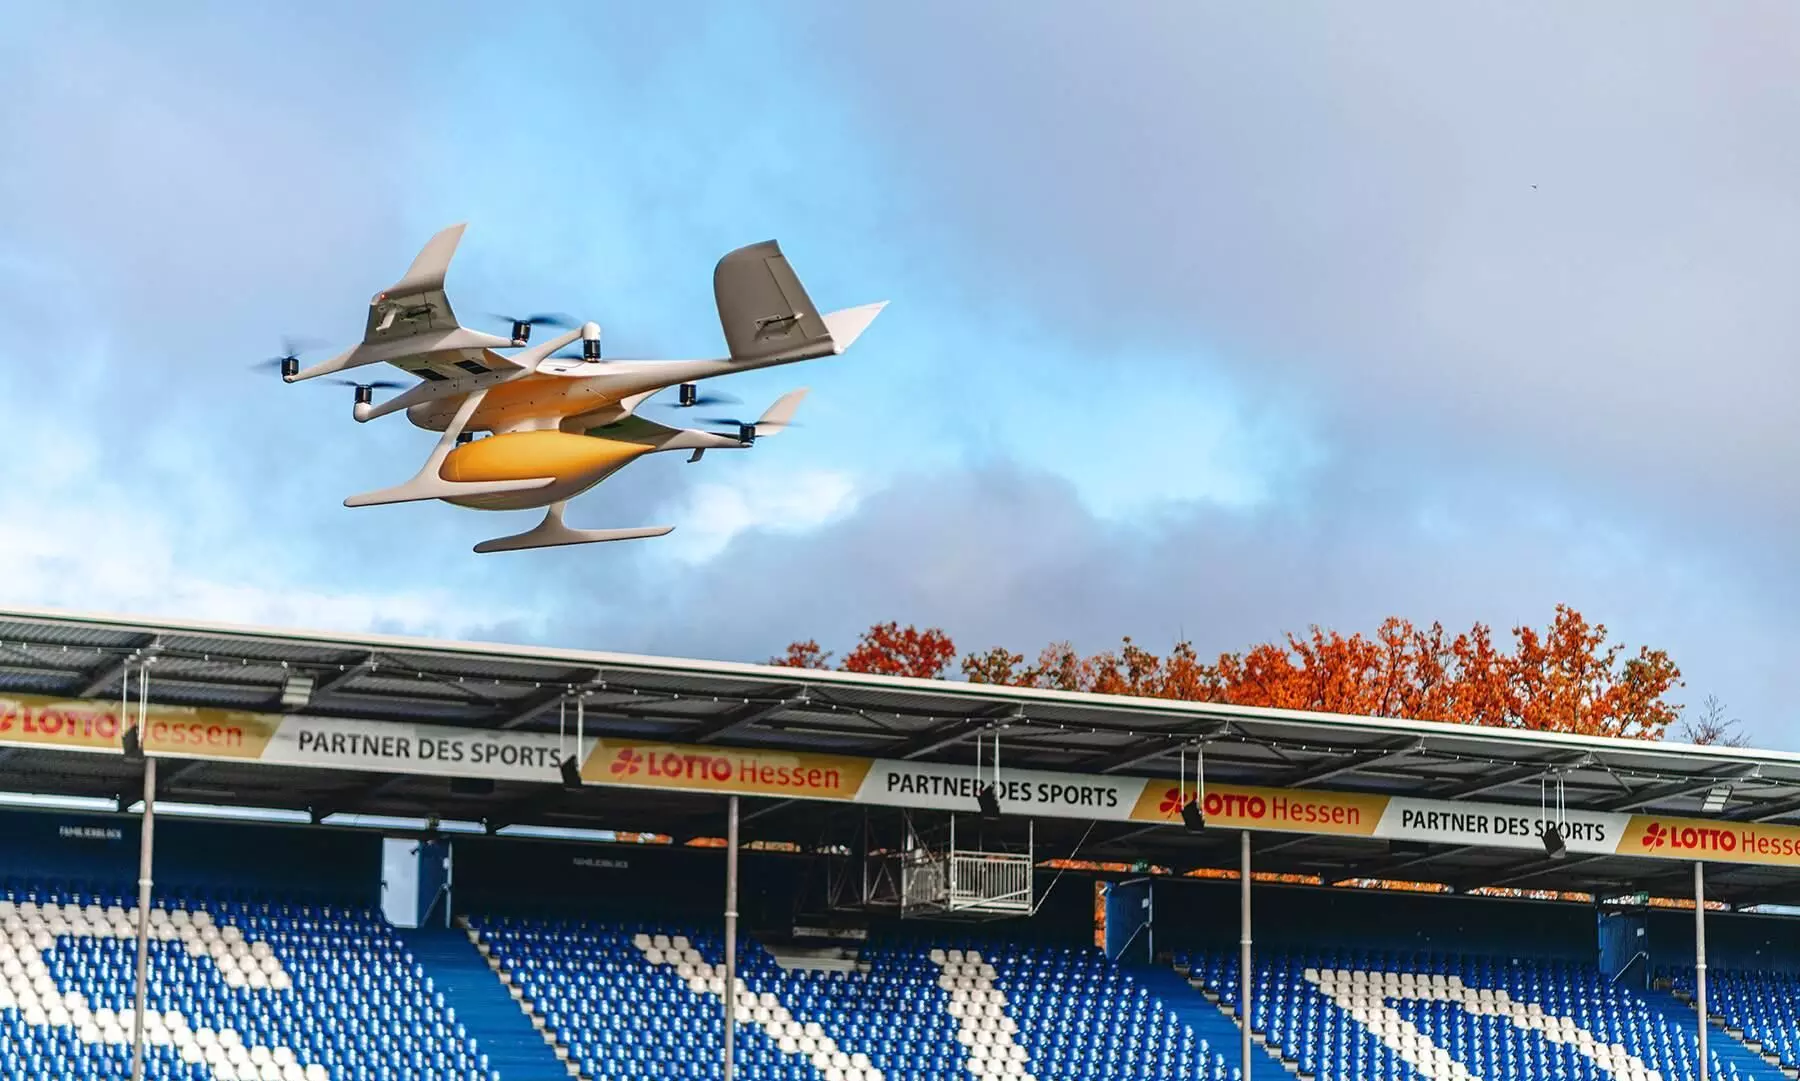 This Bundesliga club delivers fan merchandise by Wingcopter drone